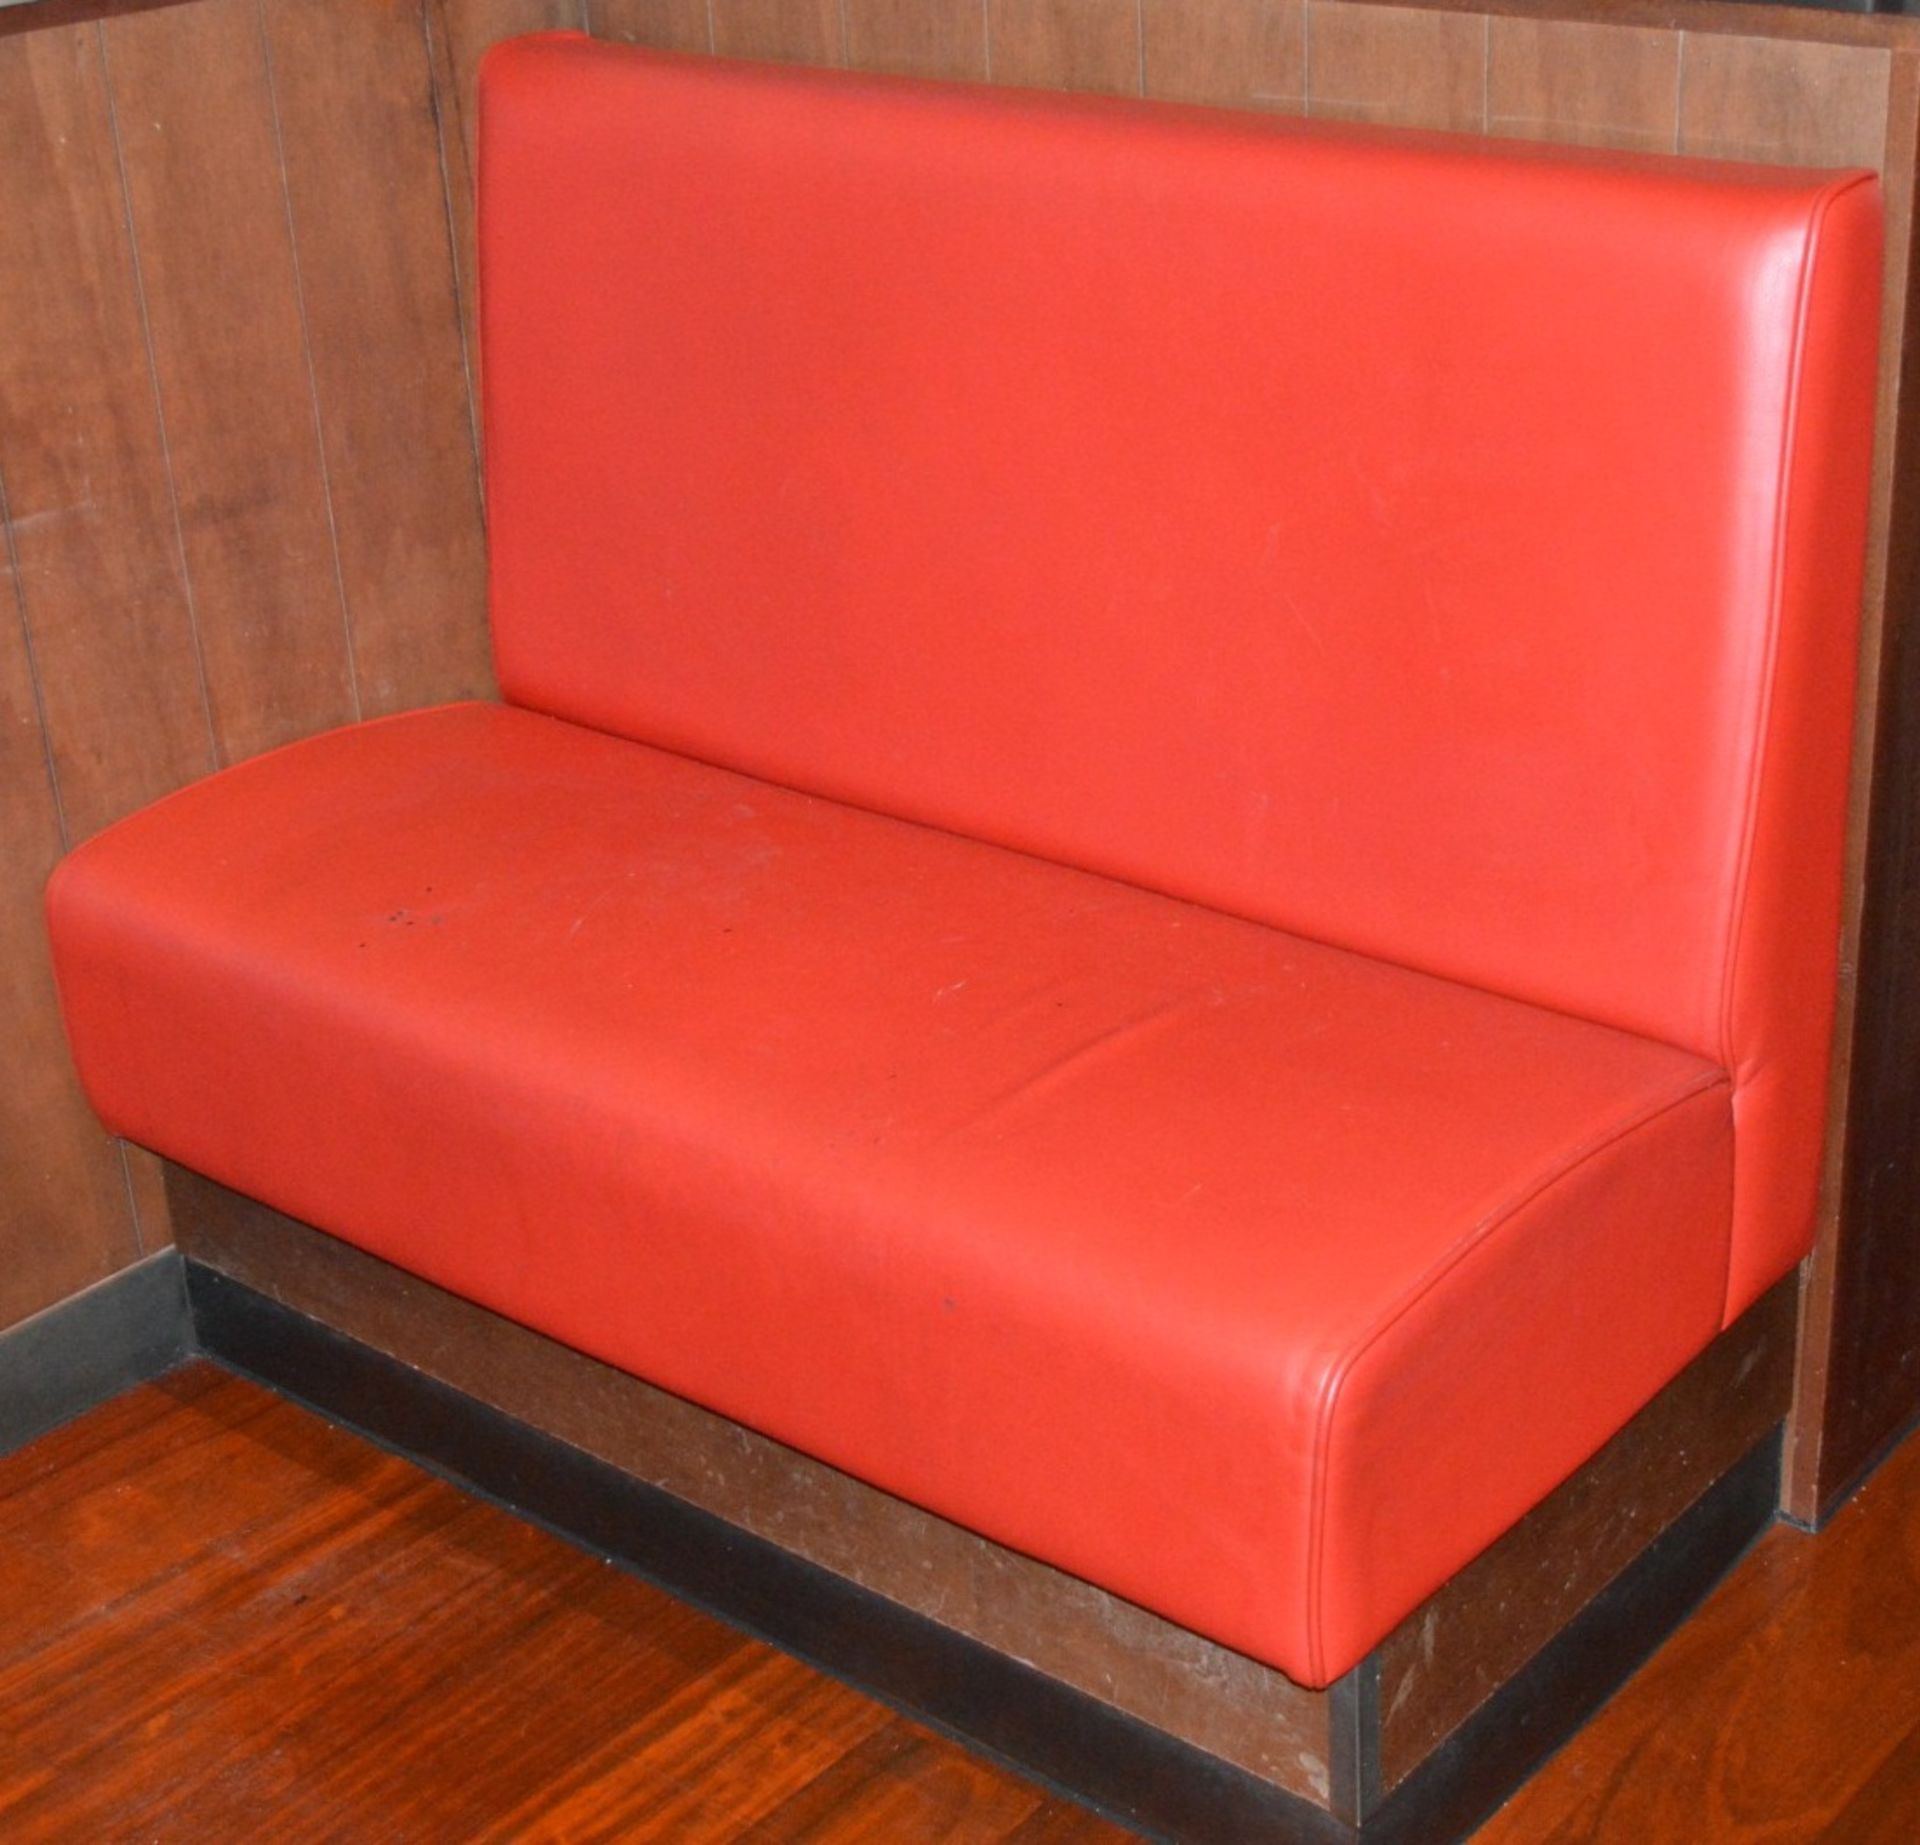 2 x Seating Booth Sections Upholstered In A Bright Red Leather - Also Includes 1 x Privacy Panel - Image 2 of 9